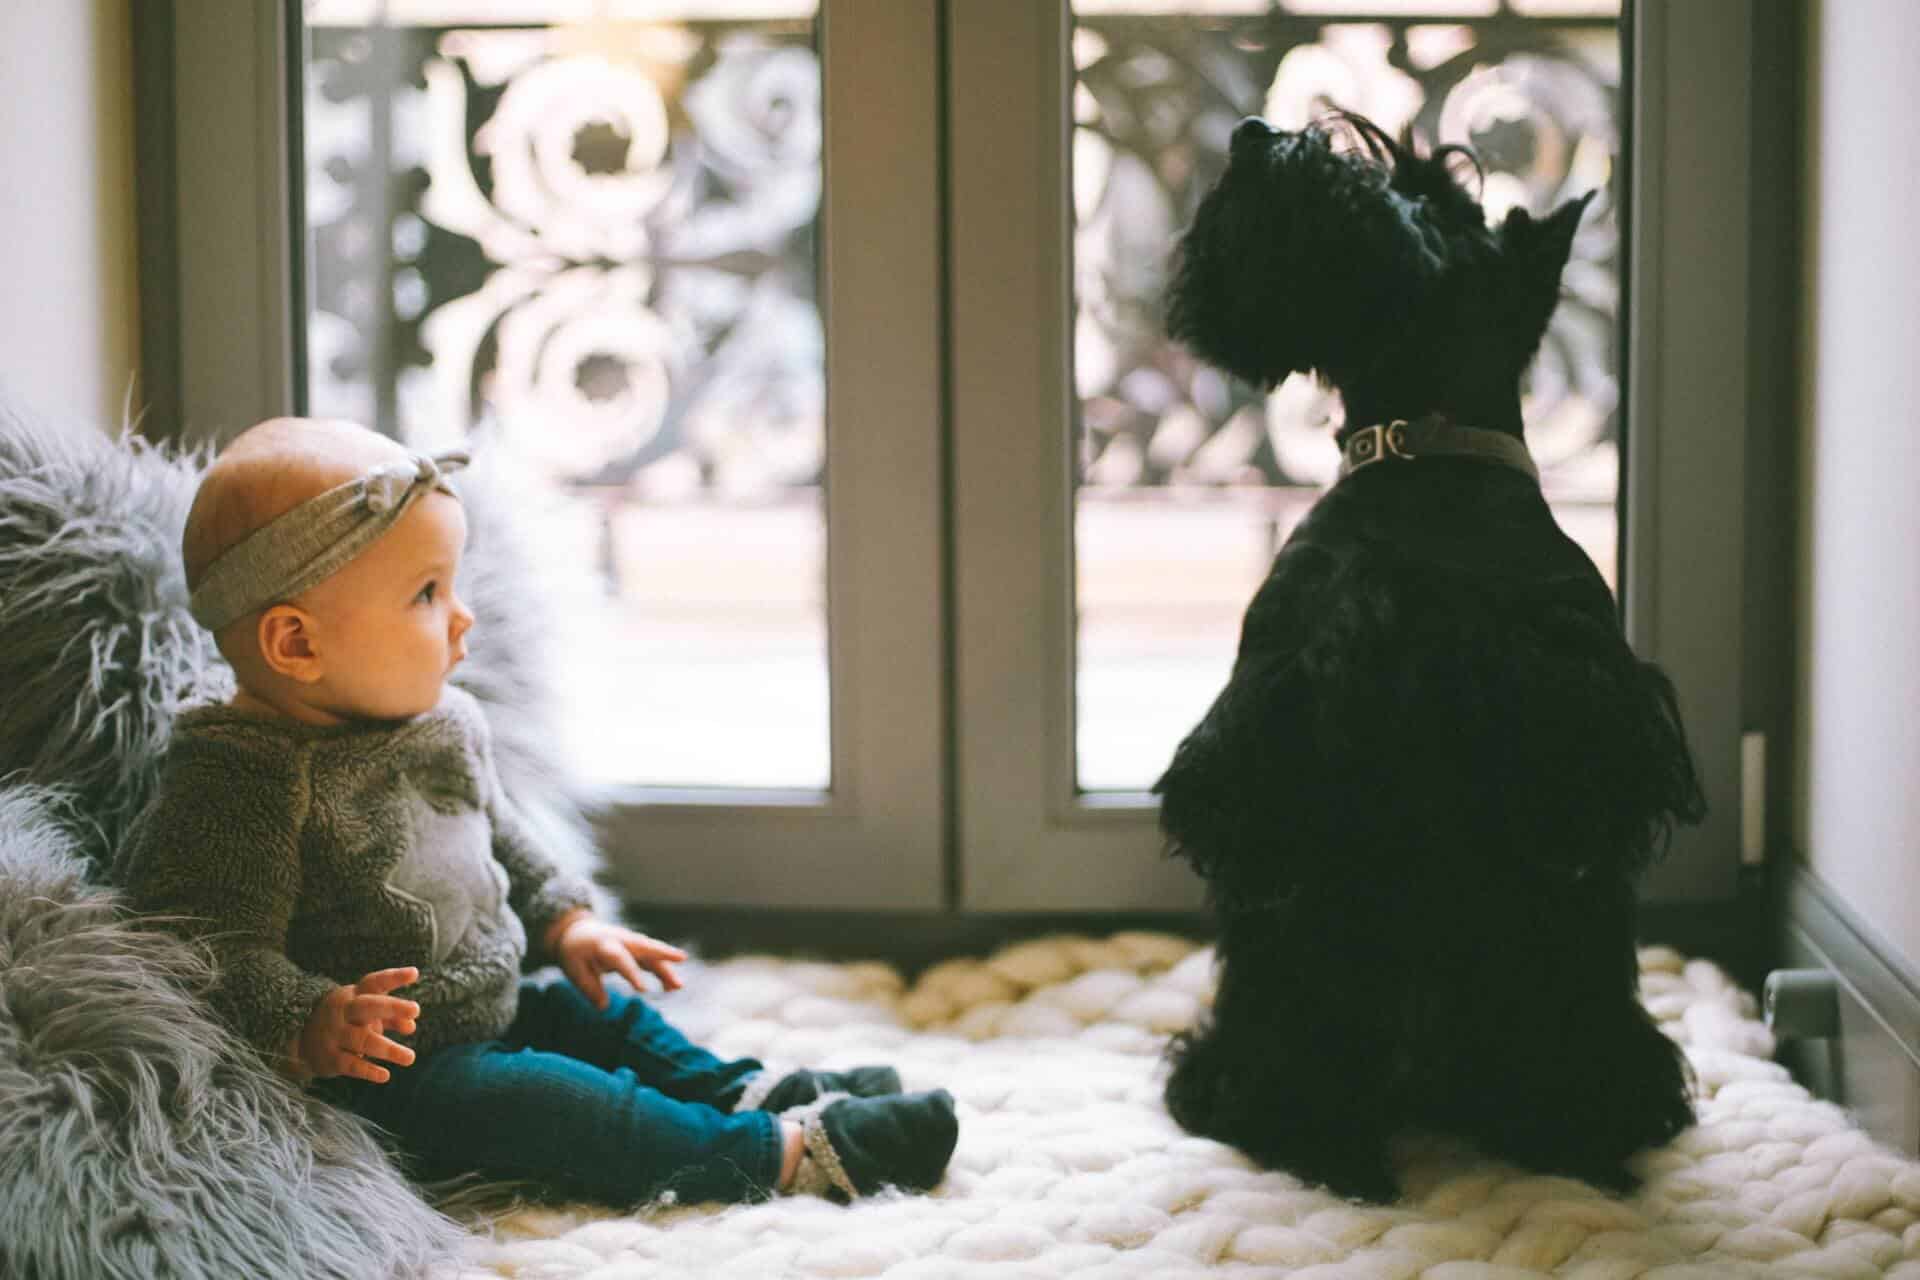 Dogs and Babies: How to Prepare Before Bringing Home a New Pooch